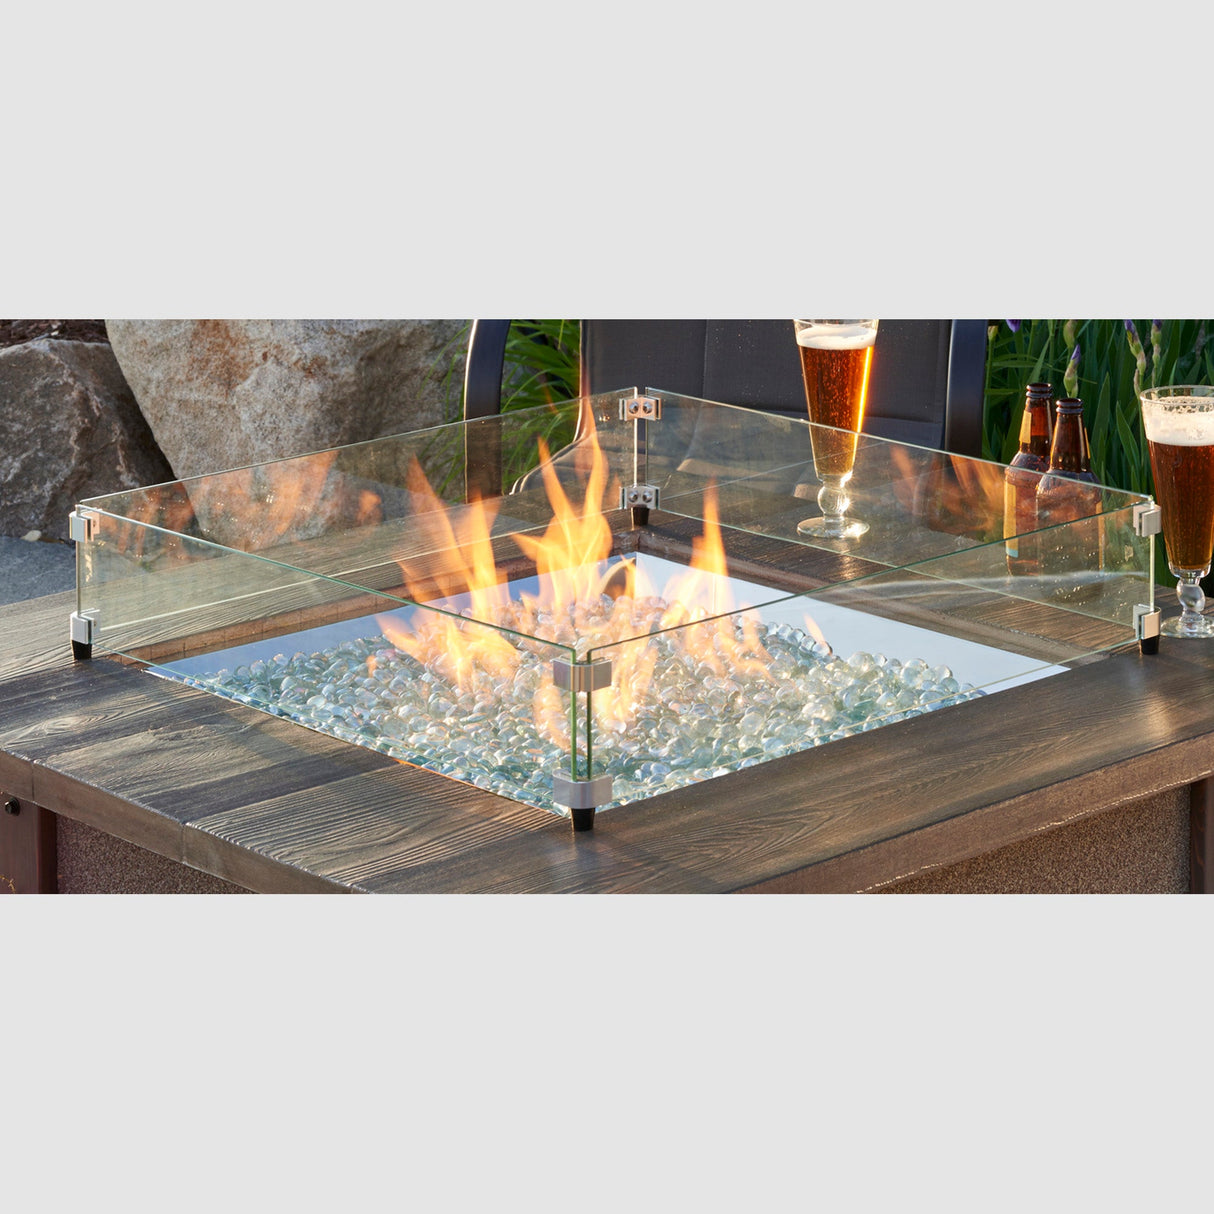 The Square Glass Wind Guard being used on a patio setting with drinks on the fire pit table